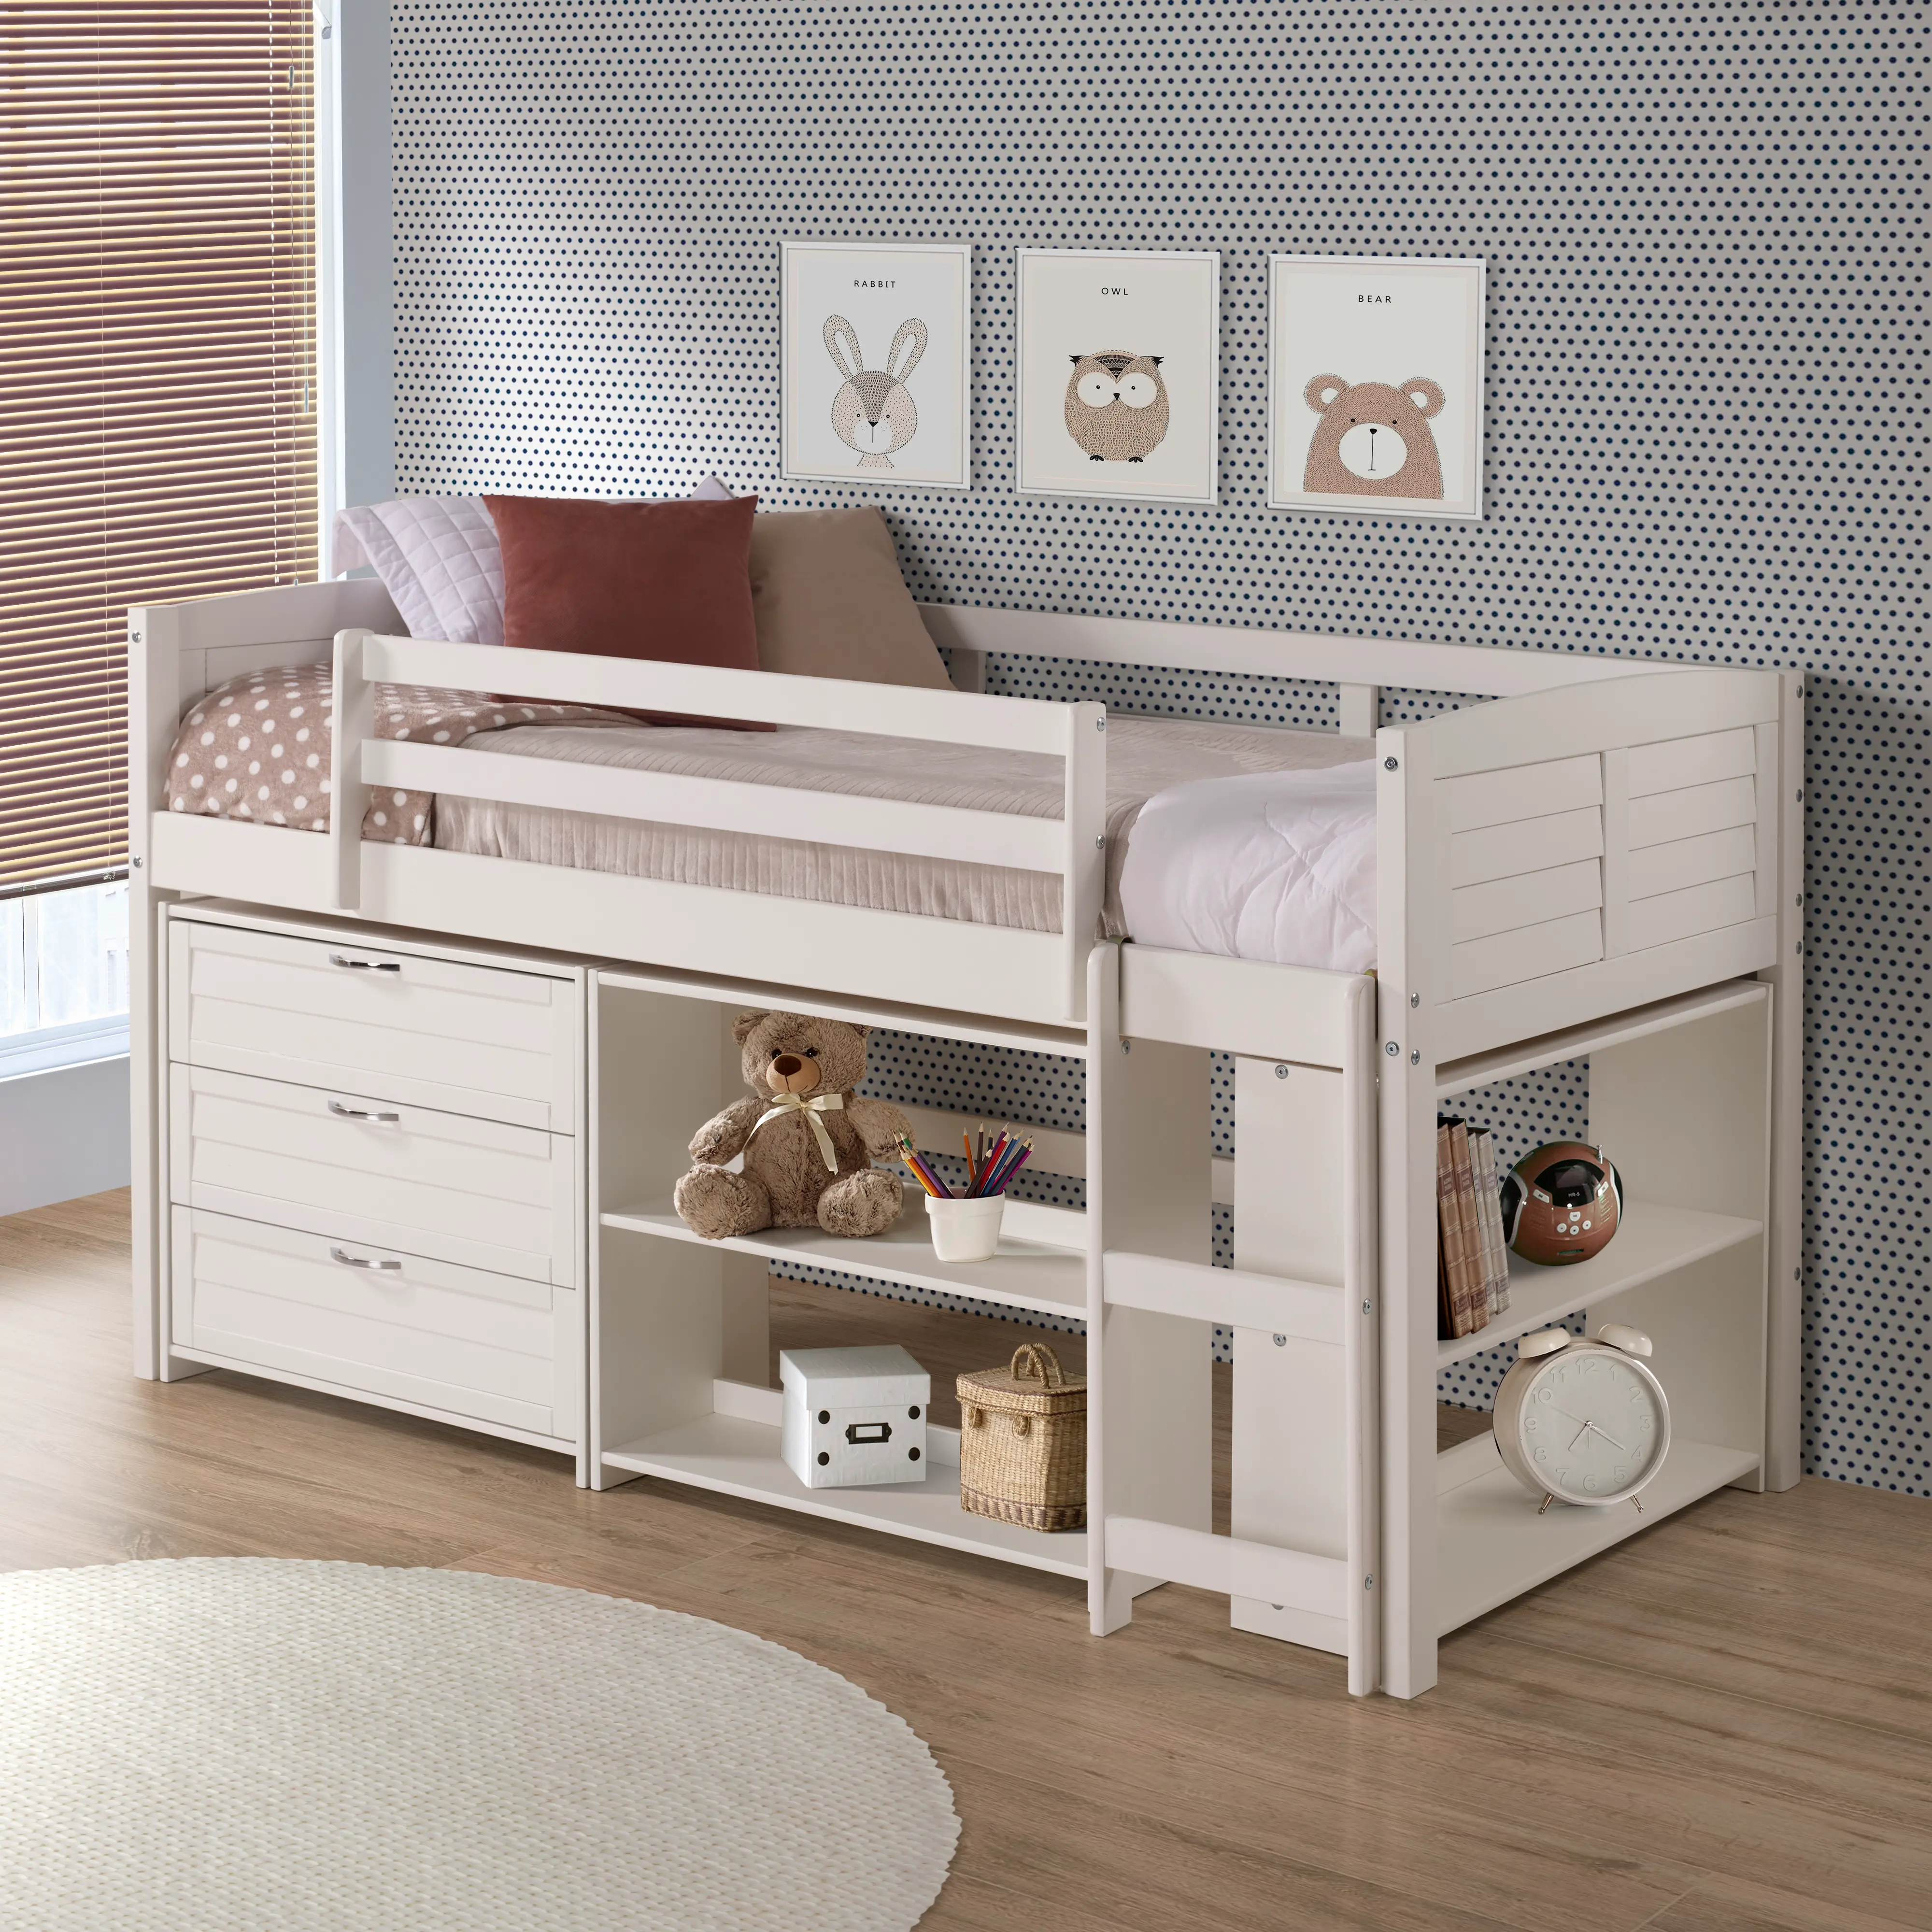 Photos - Bed Donco Trading Louver White Low Loft  Style C 790-TW-B